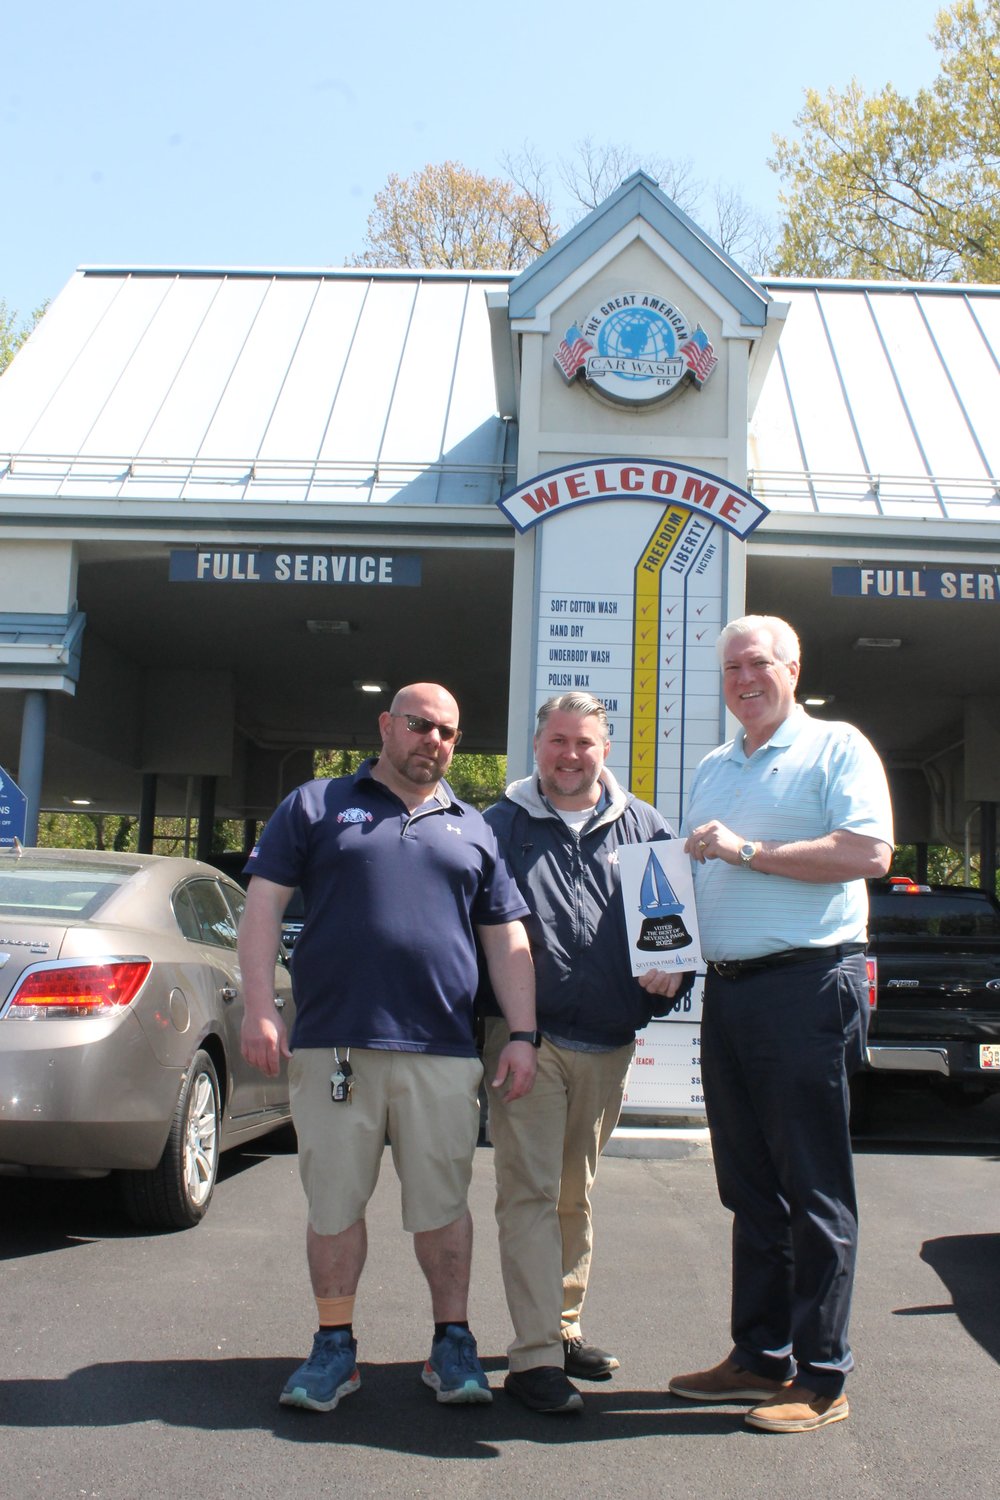 (L-R) Todd Skinner, Dave Morgan and Owner Don Hug were proud to receive their Best Of award for the Great American Car Wash.